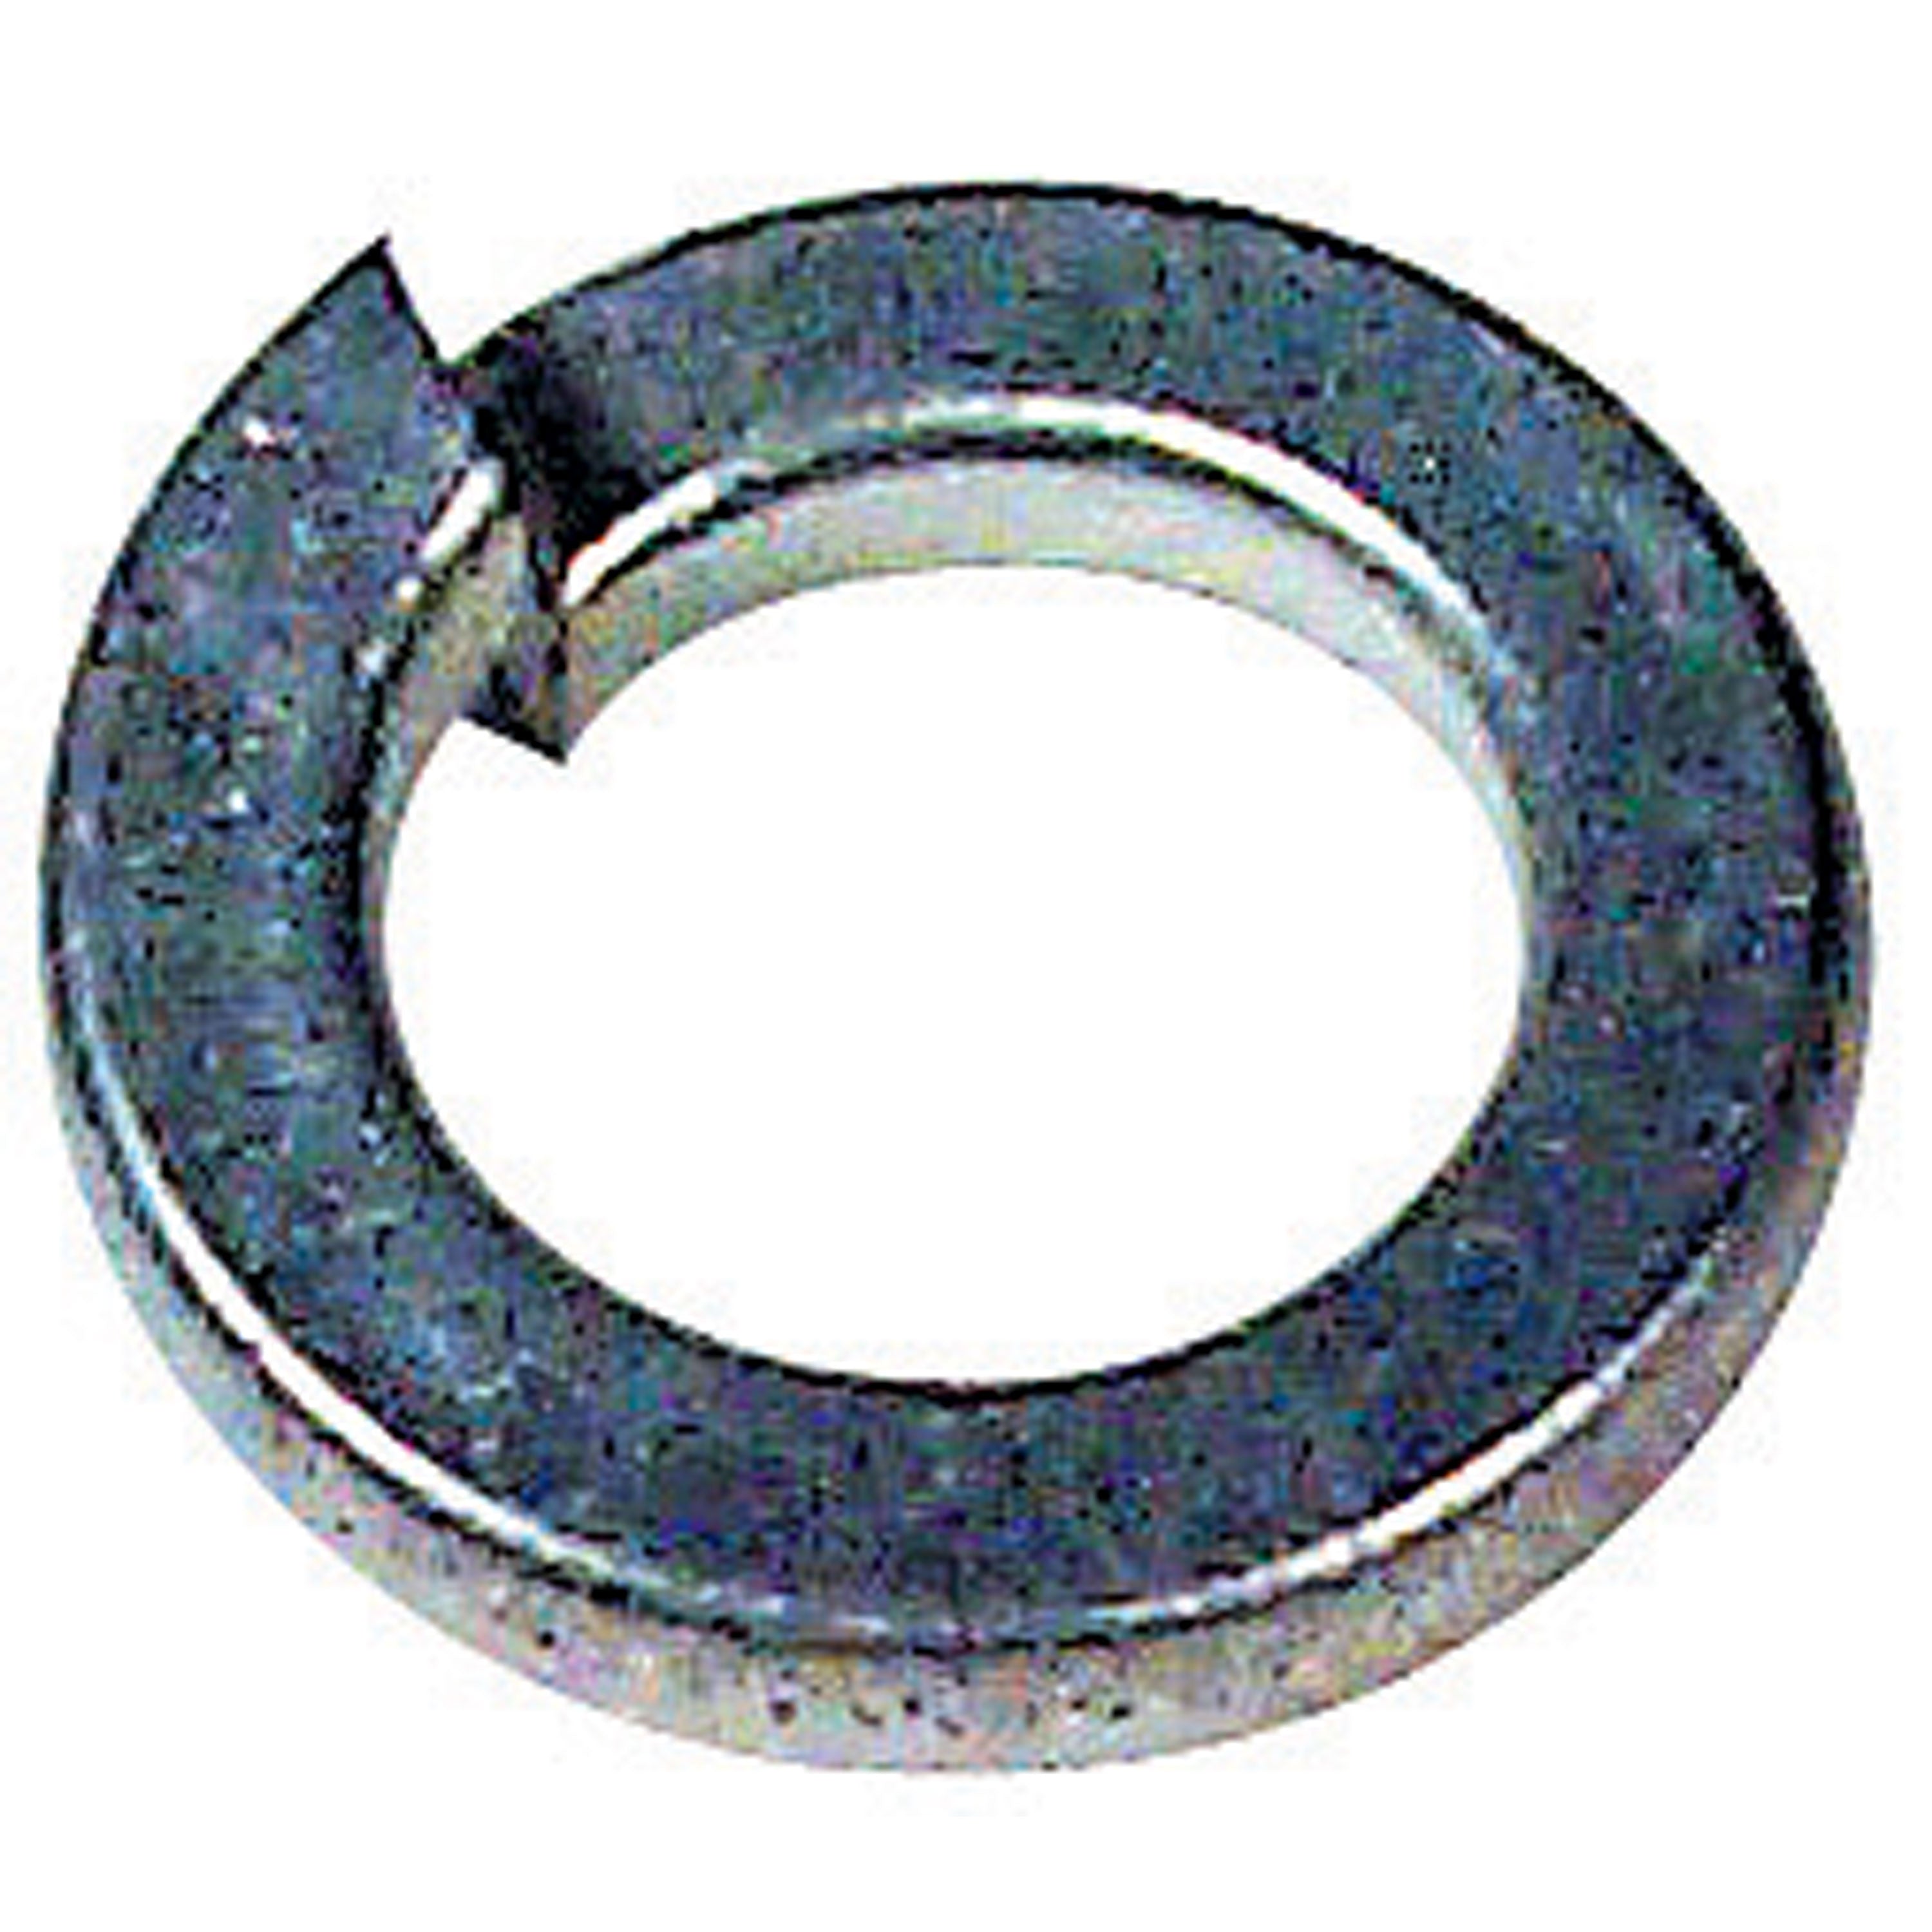 C.R. Brophy 2908 Hitch Ball Replacement Parts - 3/4" Zinc Lockwasher